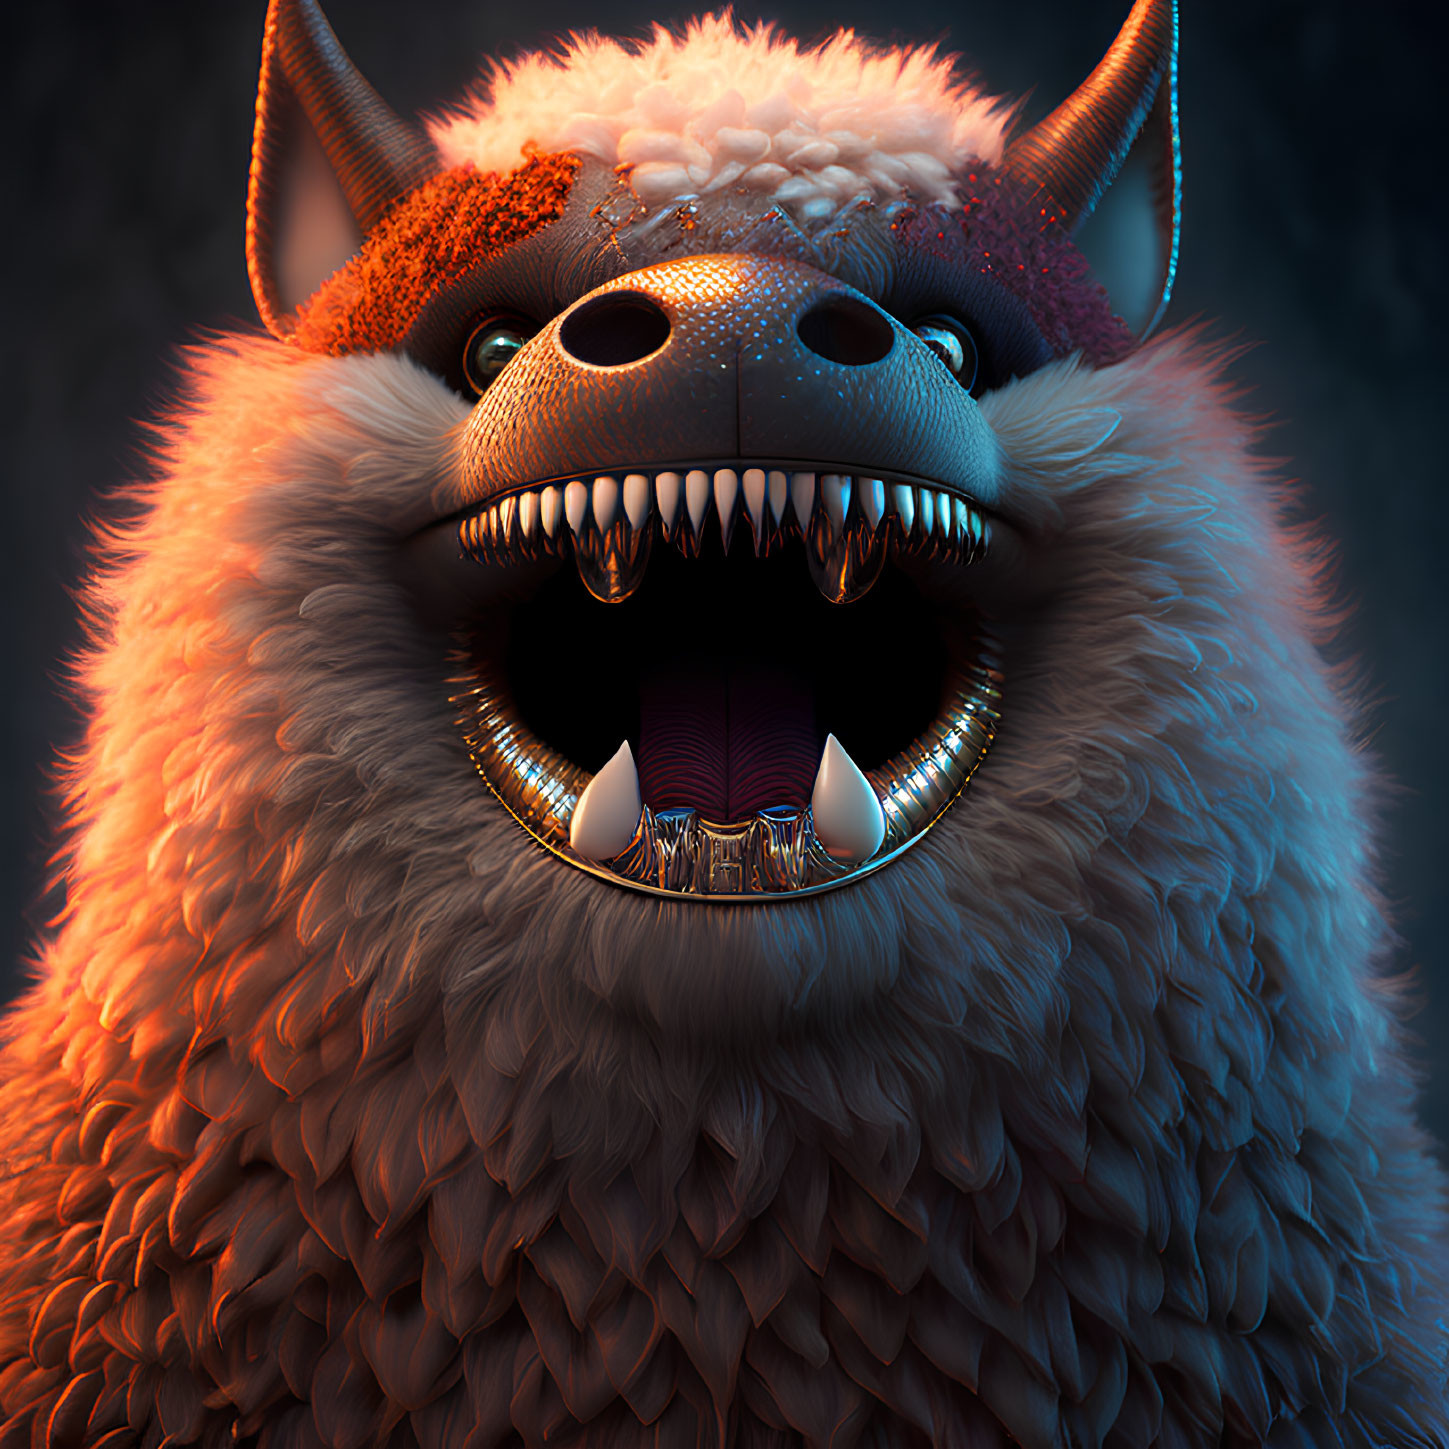 Colorful digital artwork of fierce creature with sharp teeth, large horns, and fluffy fur